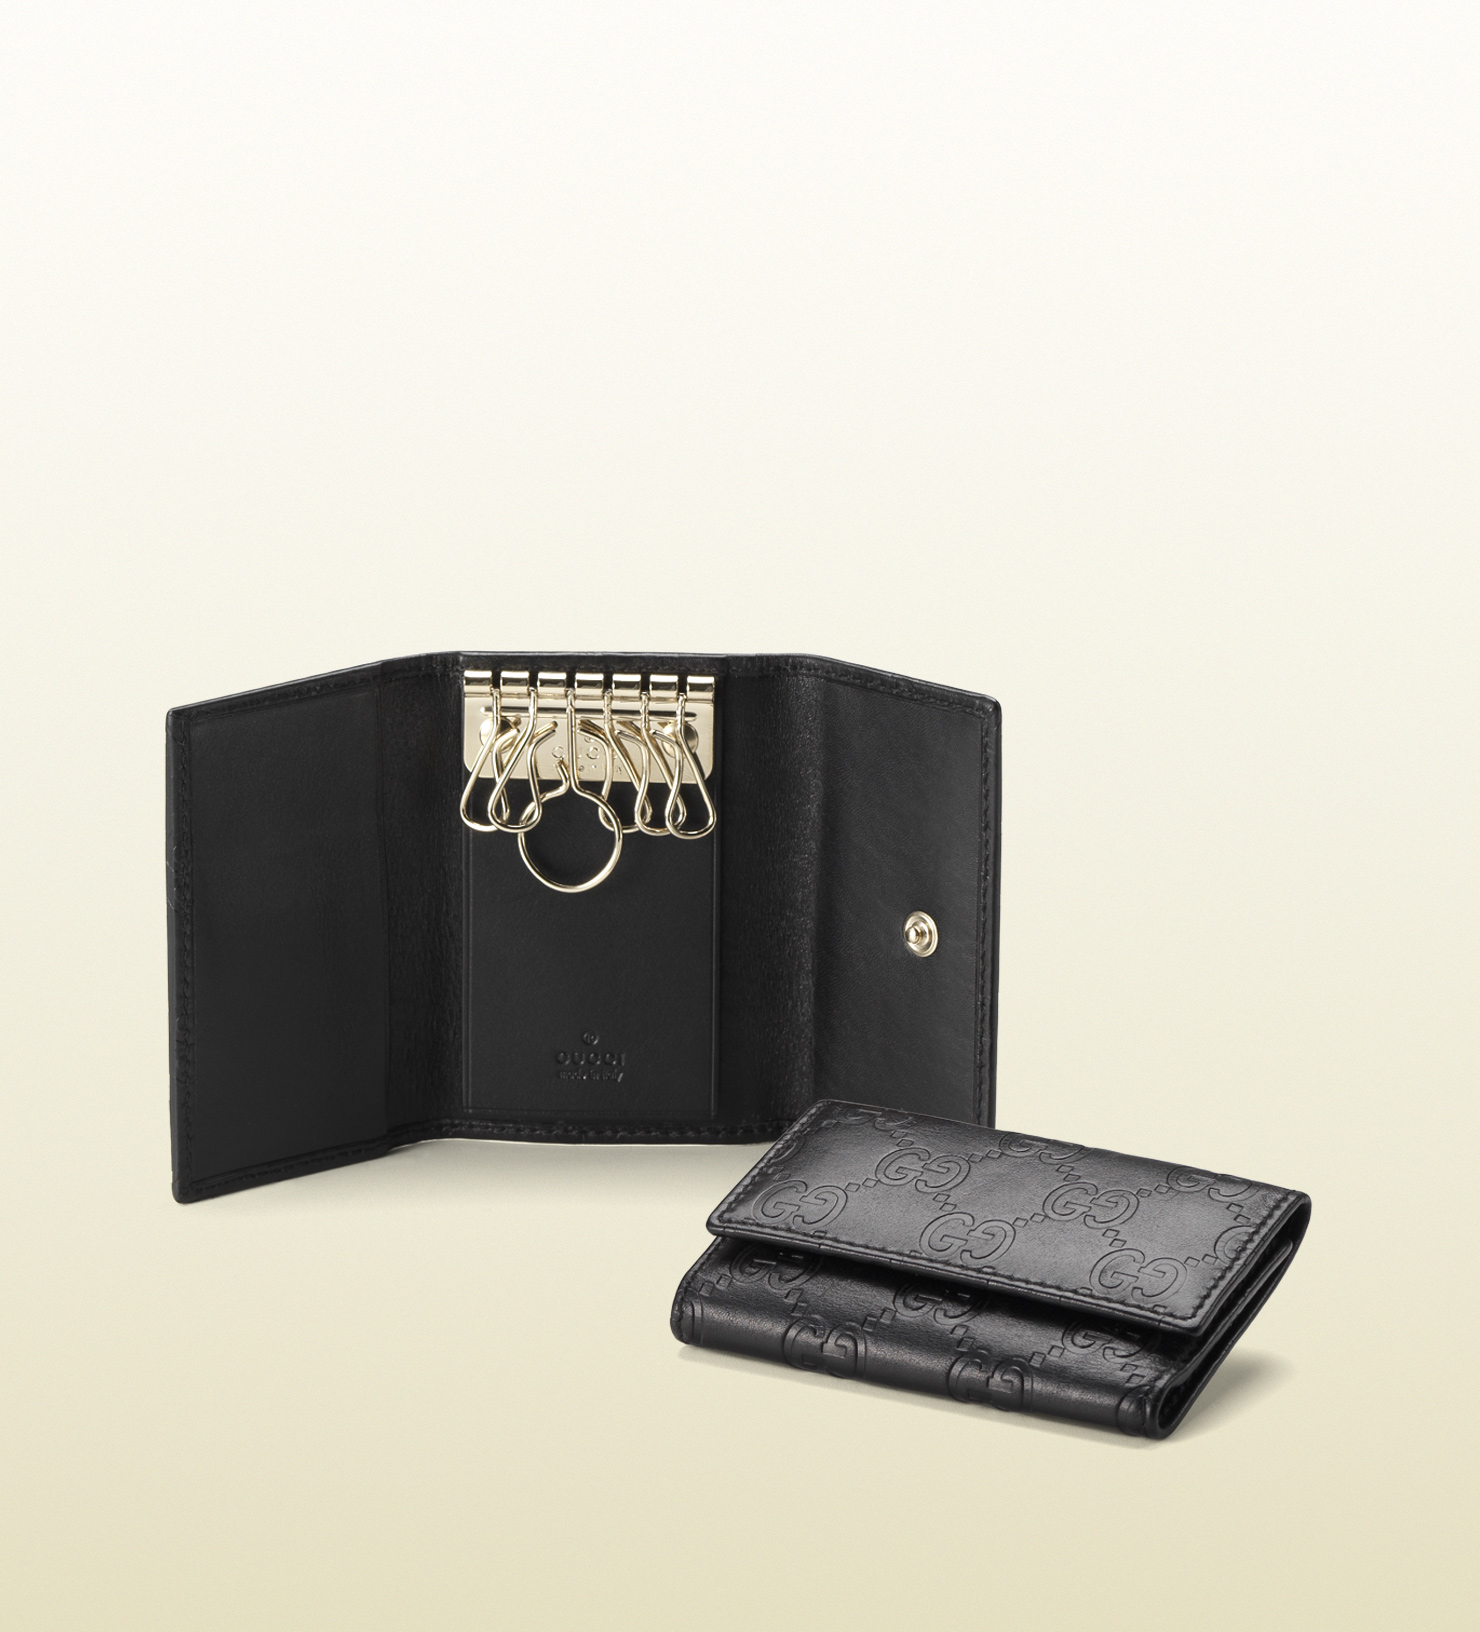 Gucci Black Key Holder Leather Trifold Wallet